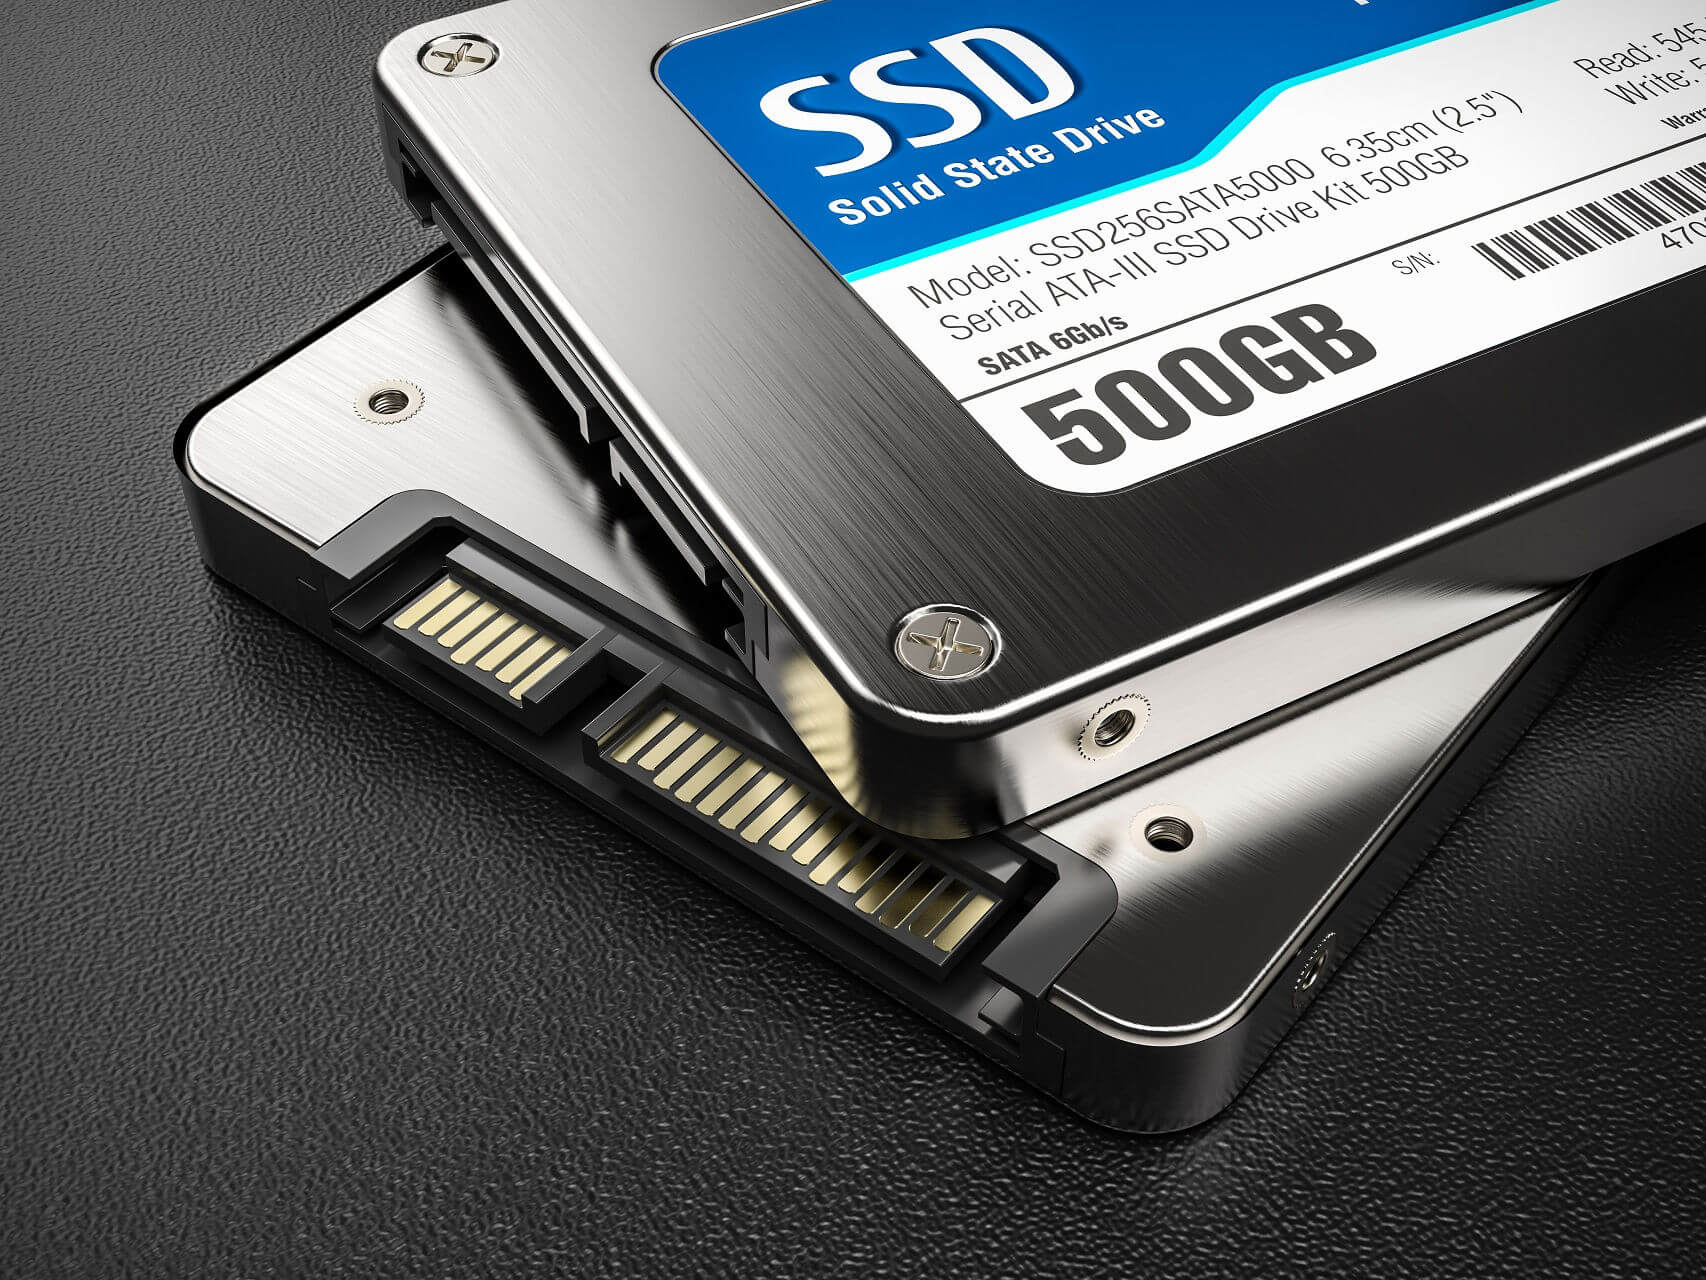 7 Largest SSDs To Buy